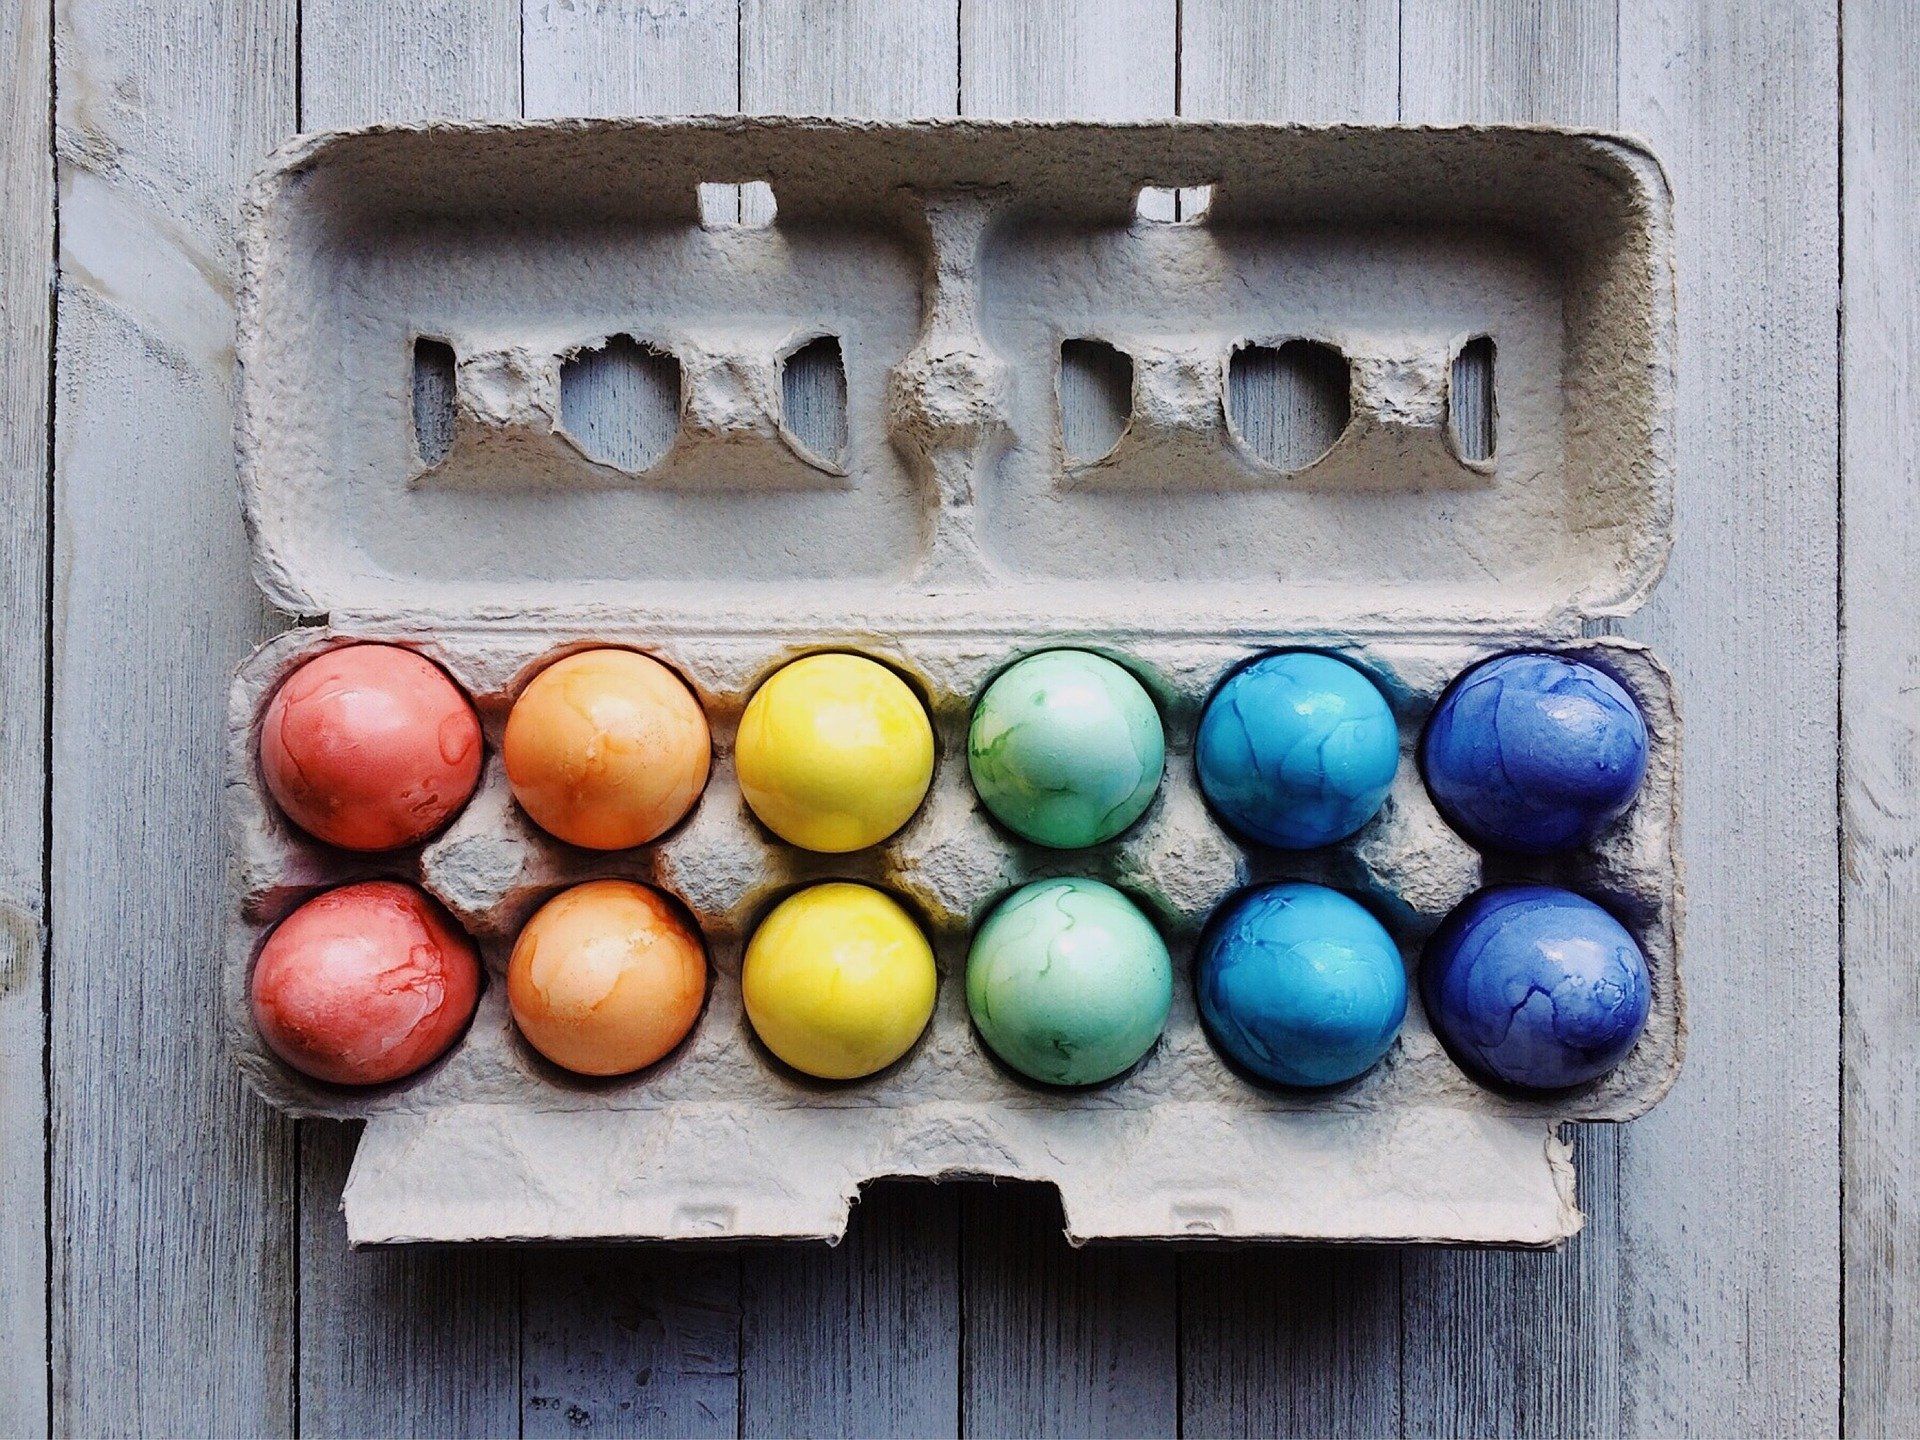 An egg carton with colorful Easter eggs